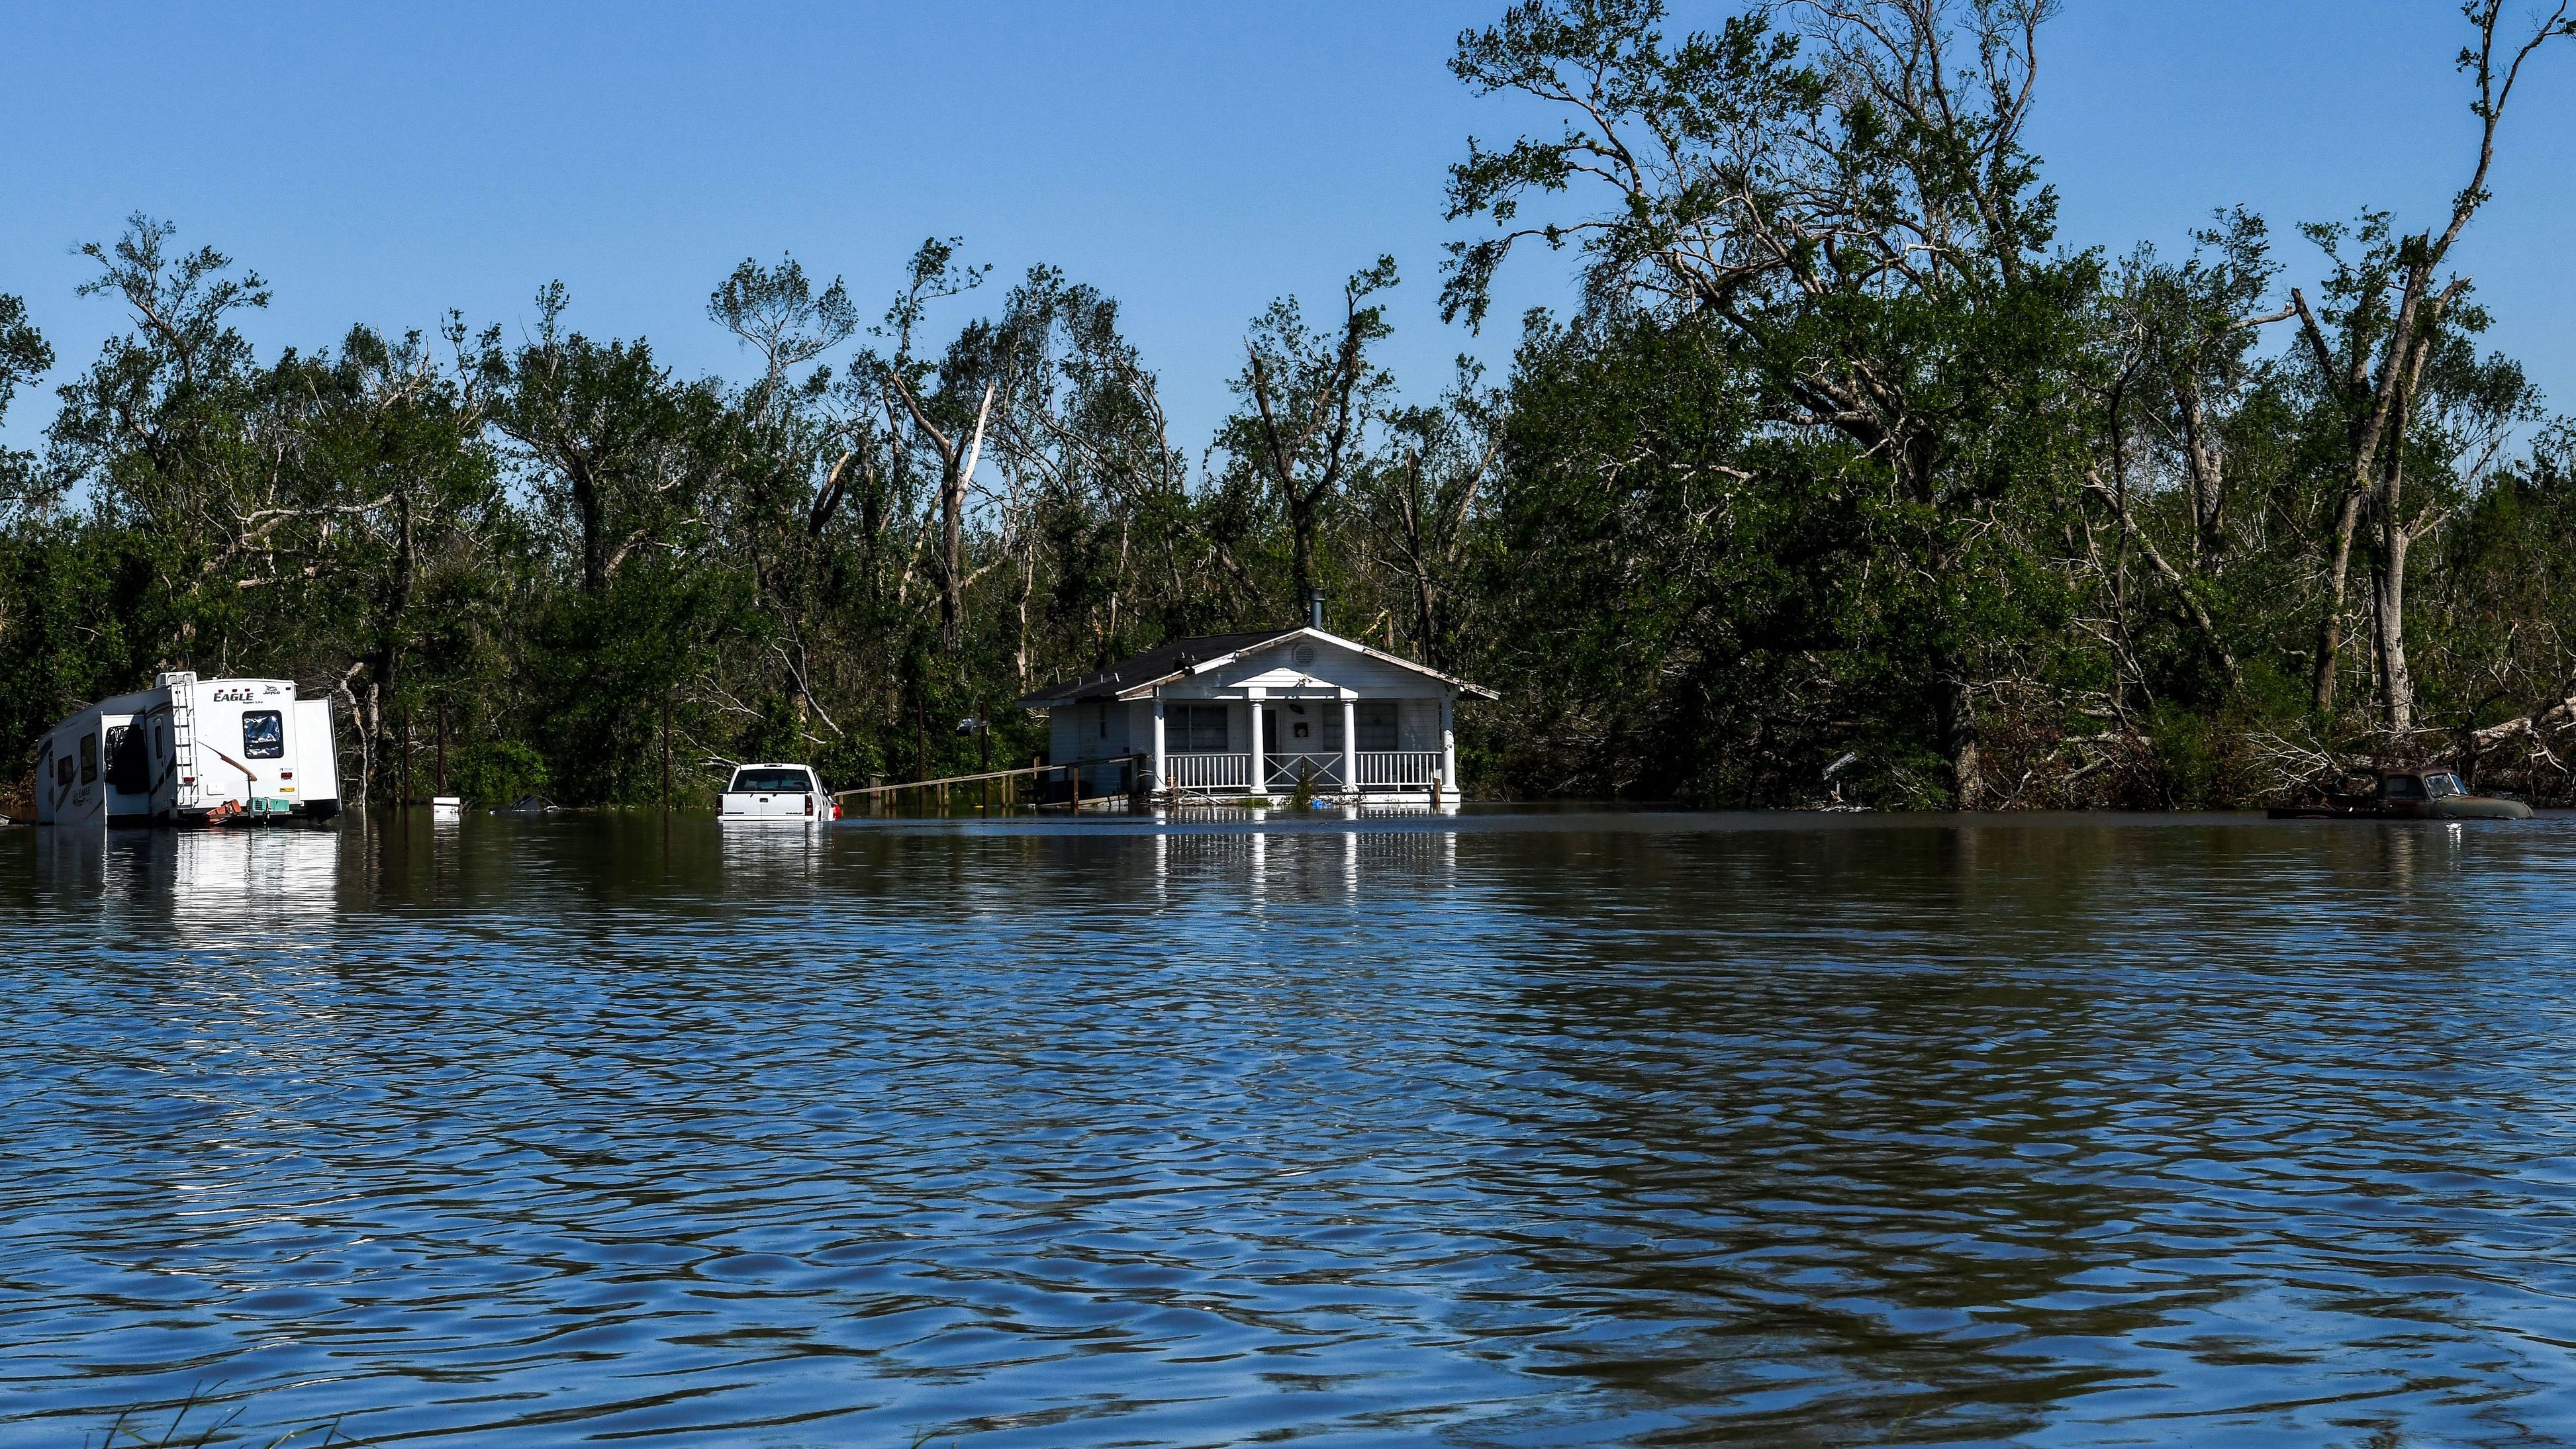 Houses near Lake Charles, Louisiana, are surrounded by flood waters on Saturday, October 10.